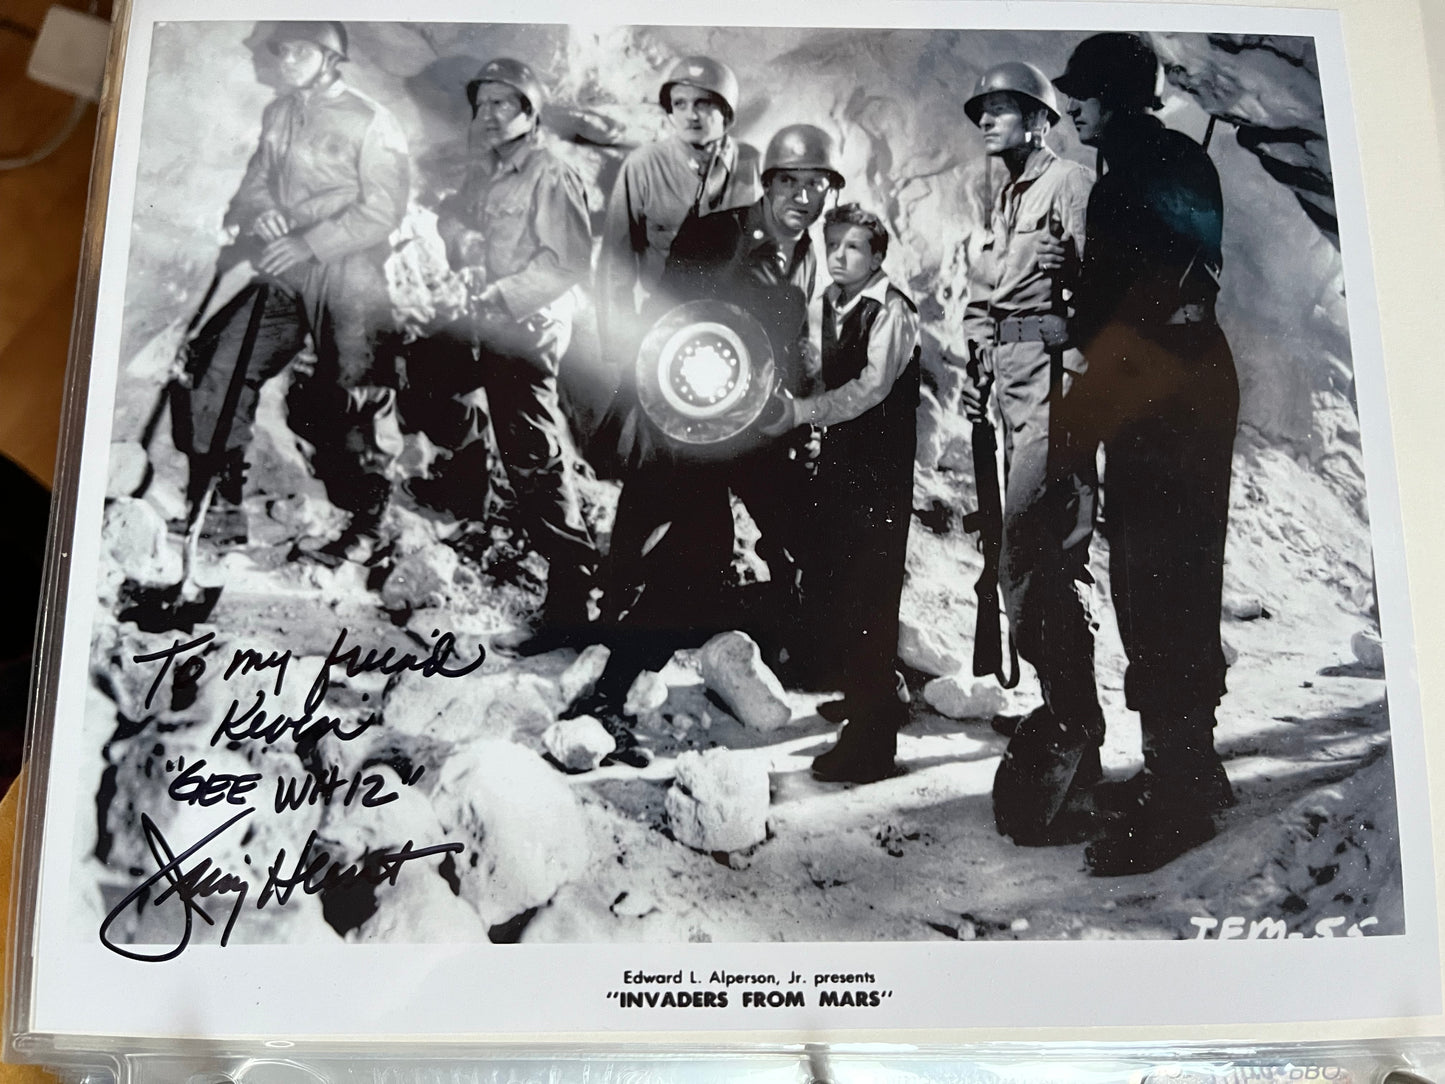 JIMMY HUNT, Invaders from Mars (1953), autograph